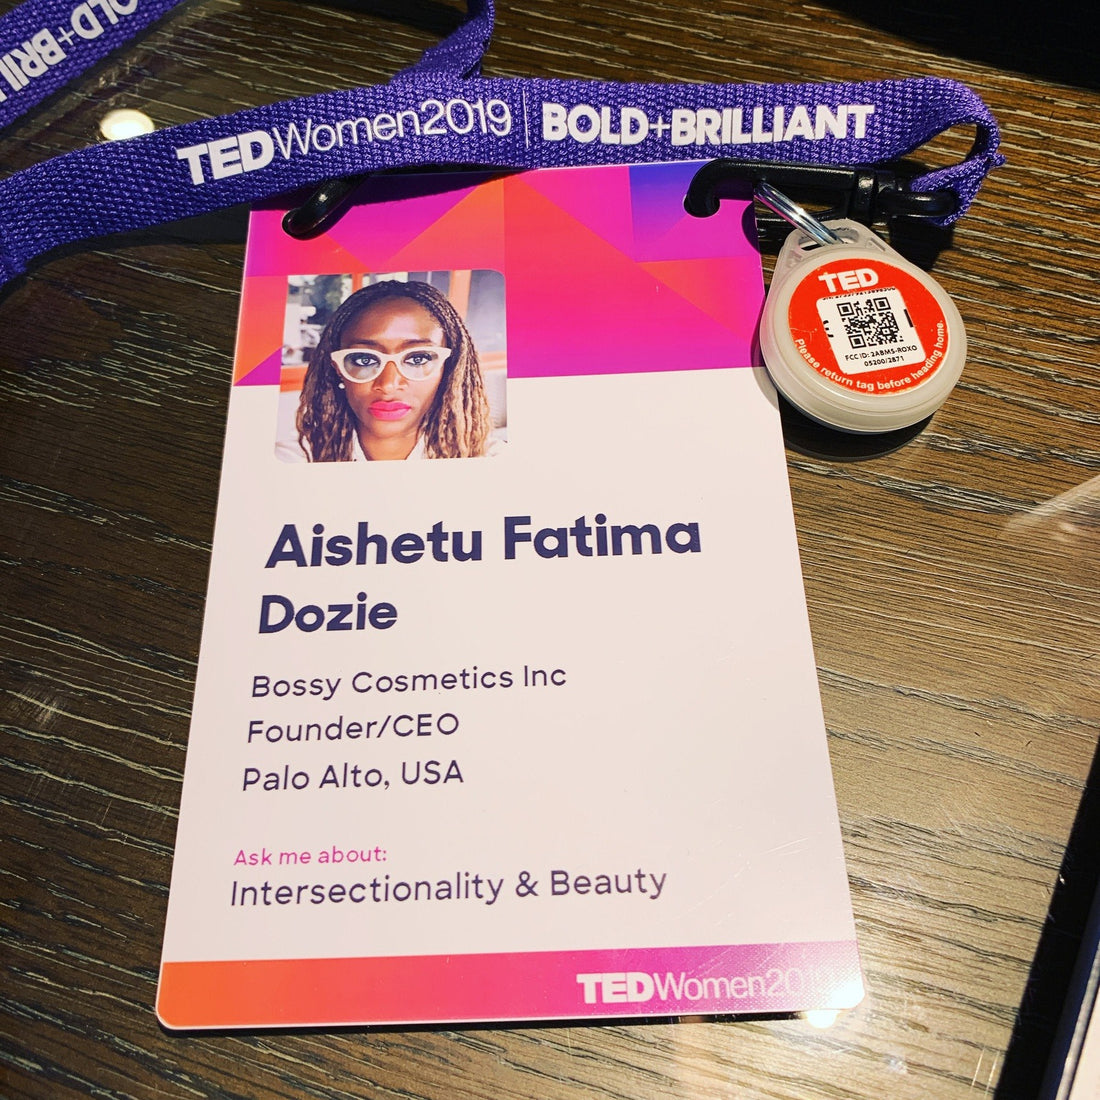 Bold + Brilliant:  My time at #TEDWomen2019